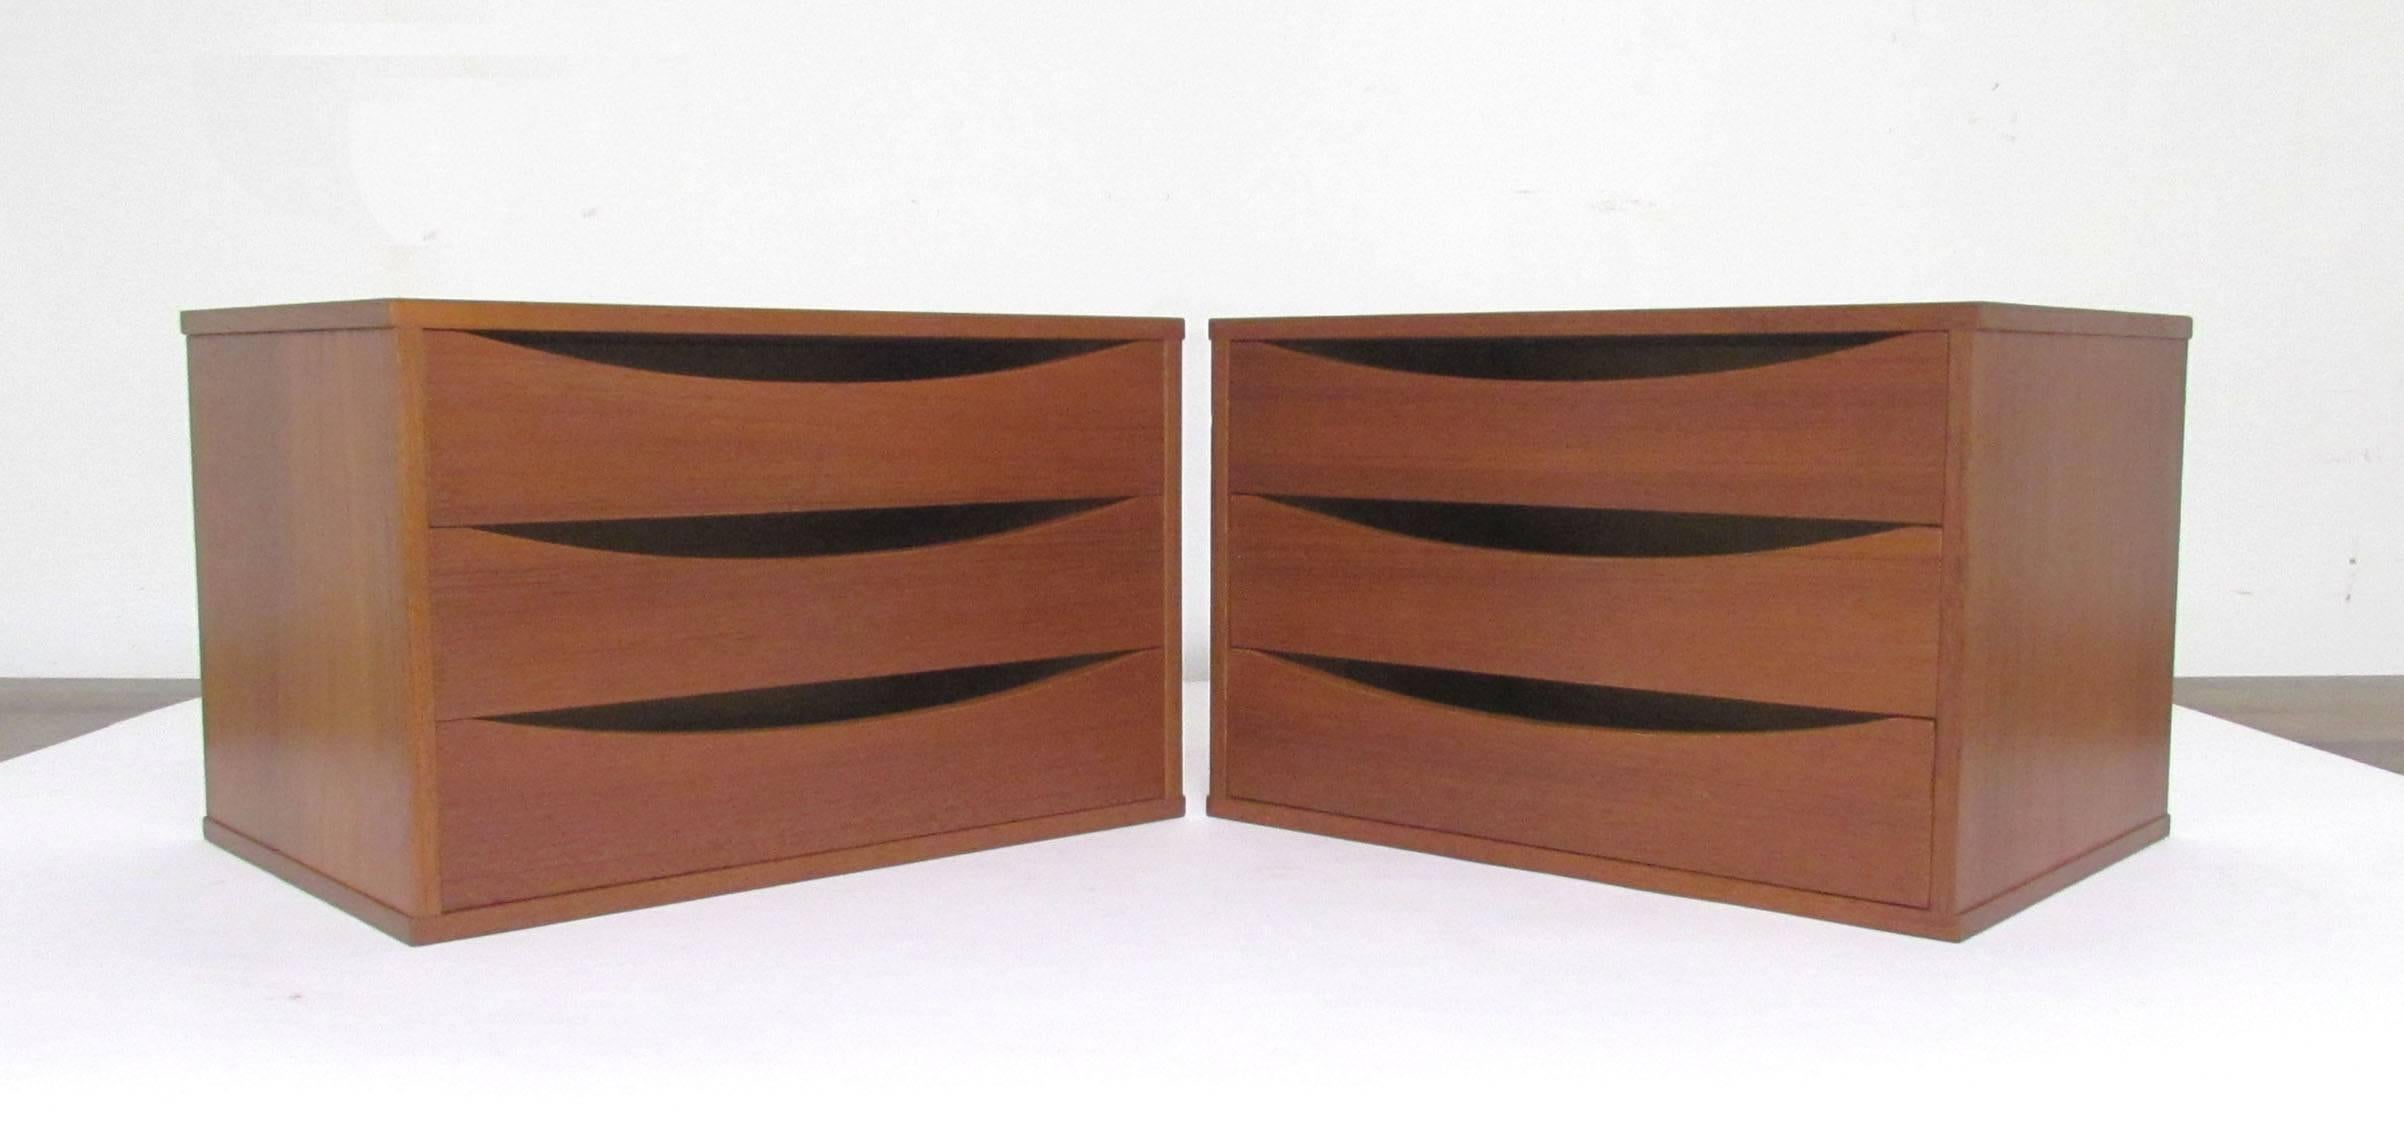 Pair of Arne Vodder teak boxes that can be used as jewelry boxes or desktop paper organizers, side by side or stacked.